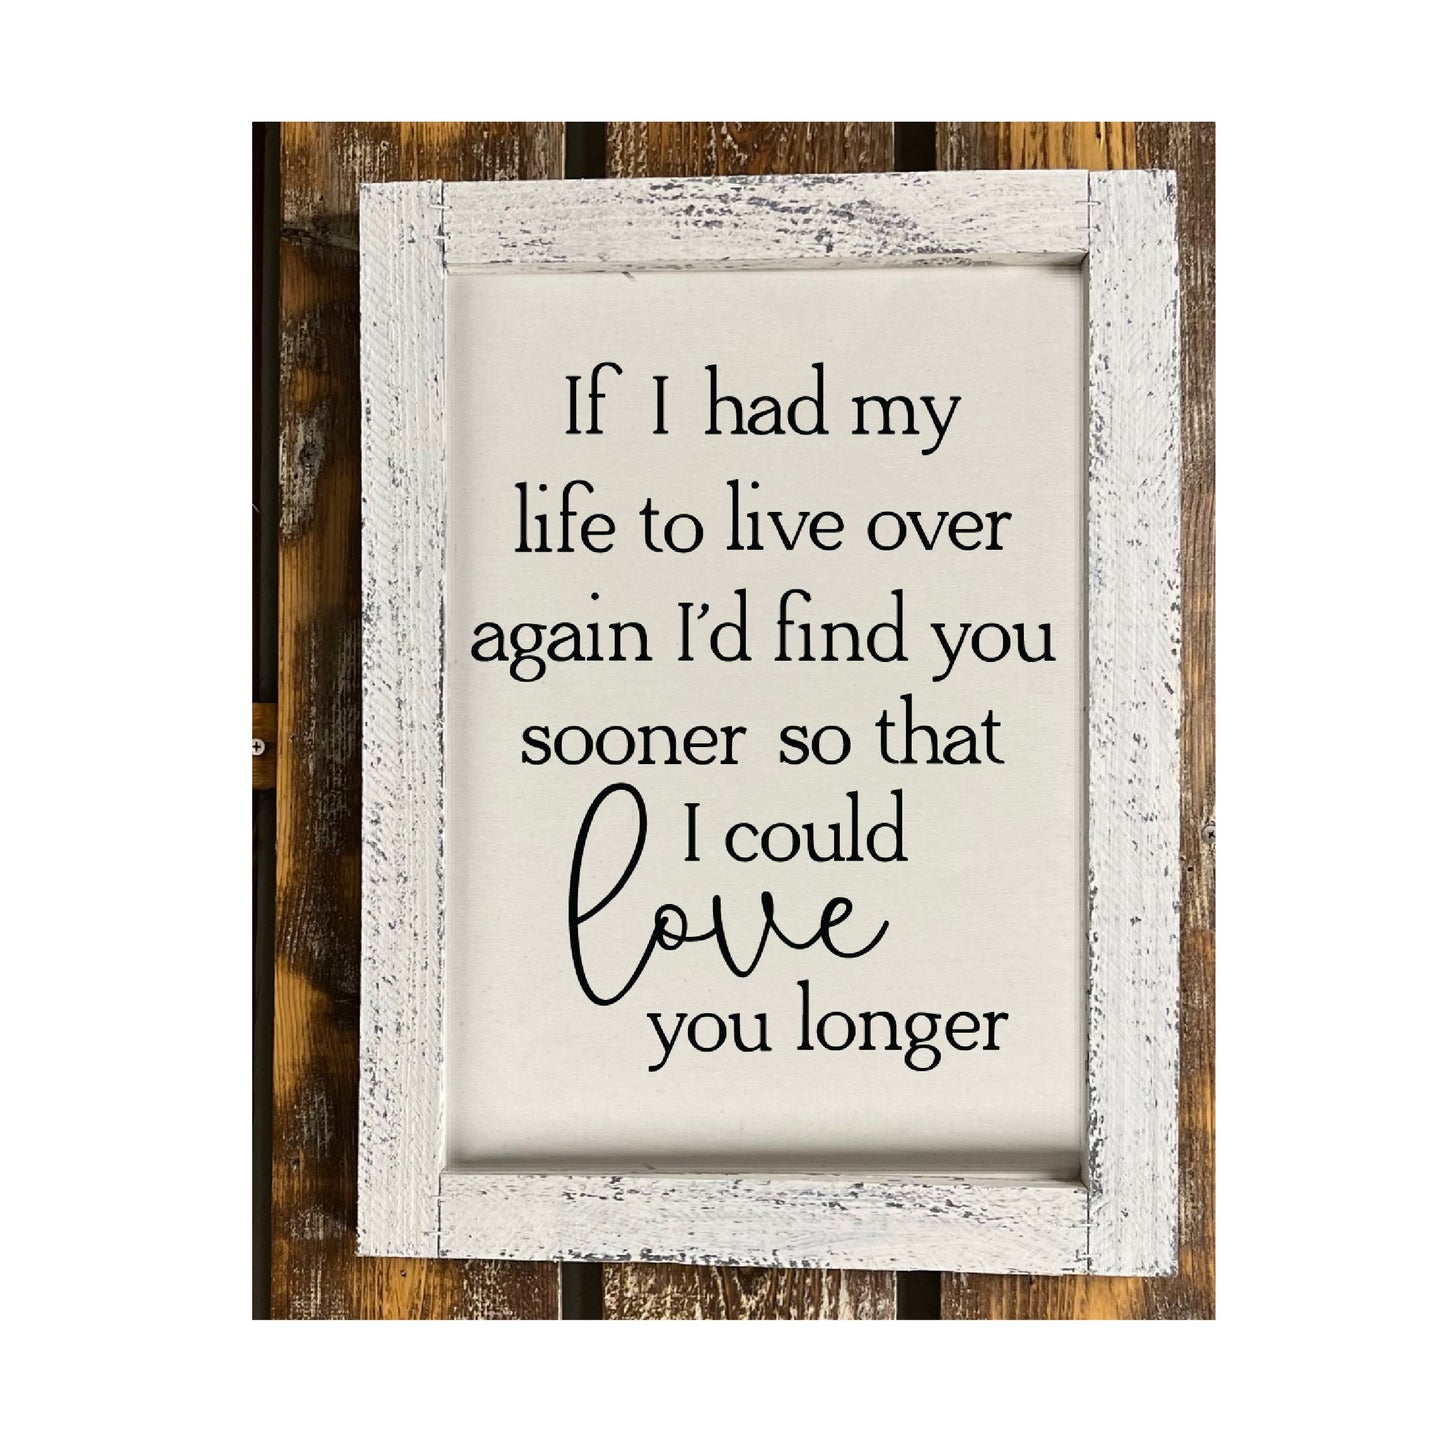 If I Had My Life To Live Over Again I'd Find You Sooner...